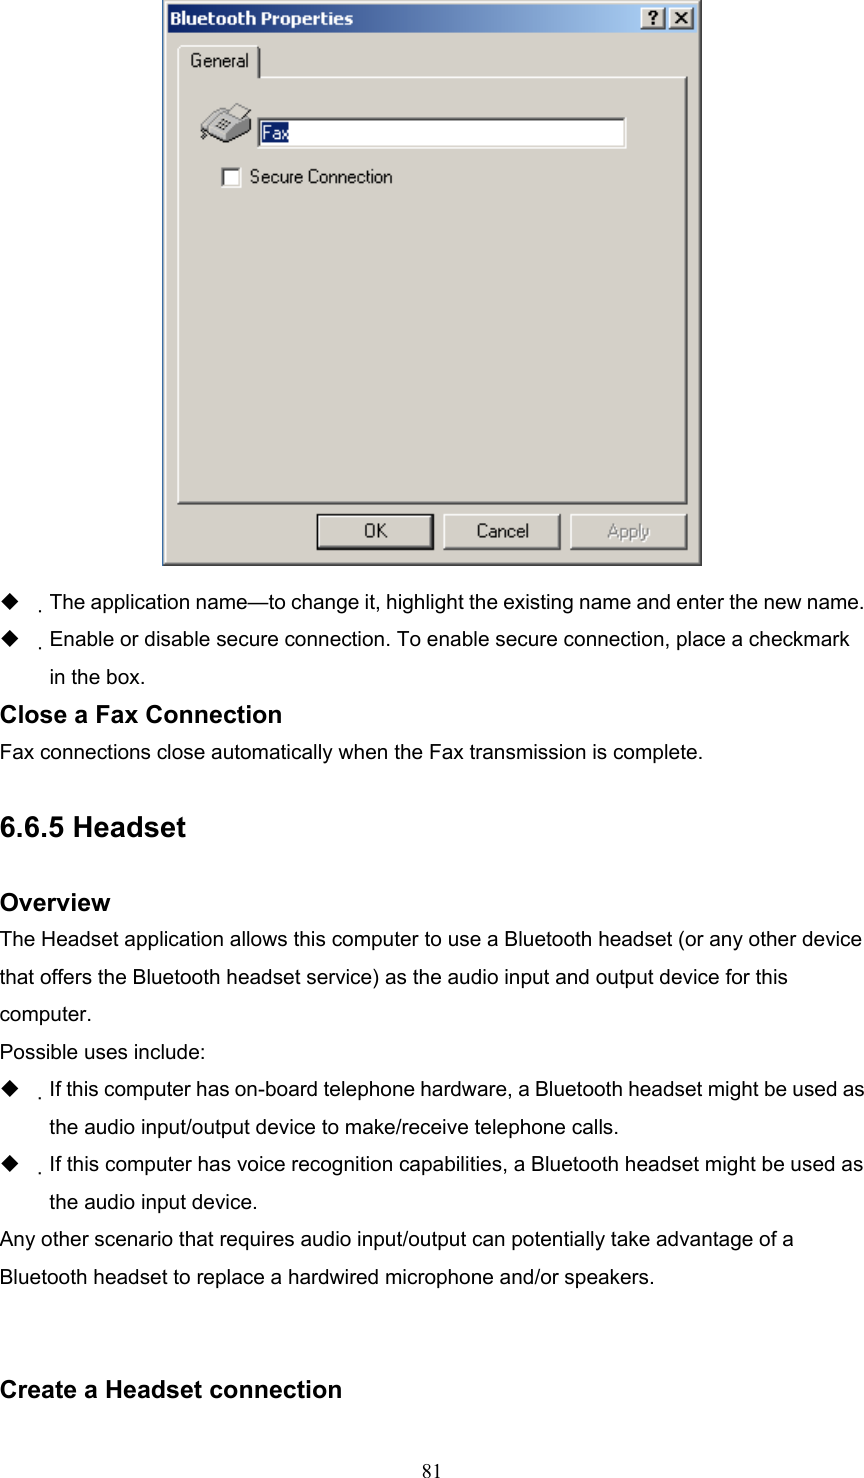  81    The application name—to change it, highlight the existing name and enter the new name.   Enable or disable secure connection. To enable secure connection, place a checkmark in the box. Close a Fax Connection Fax connections close automatically when the Fax transmission is complete.  6.6.5 Headset  Overview The Headset application allows this computer to use a Bluetooth headset (or any other device that offers the Bluetooth headset service) as the audio input and output device for this computer. Possible uses include:   If this computer has on-board telephone hardware, a Bluetooth headset might be used as the audio input/output device to make/receive telephone calls.   If this computer has voice recognition capabilities, a Bluetooth headset might be used as the audio input device. Any other scenario that requires audio input/output can potentially take advantage of a Bluetooth headset to replace a hardwired microphone and/or speakers.   Create a Headset connection 